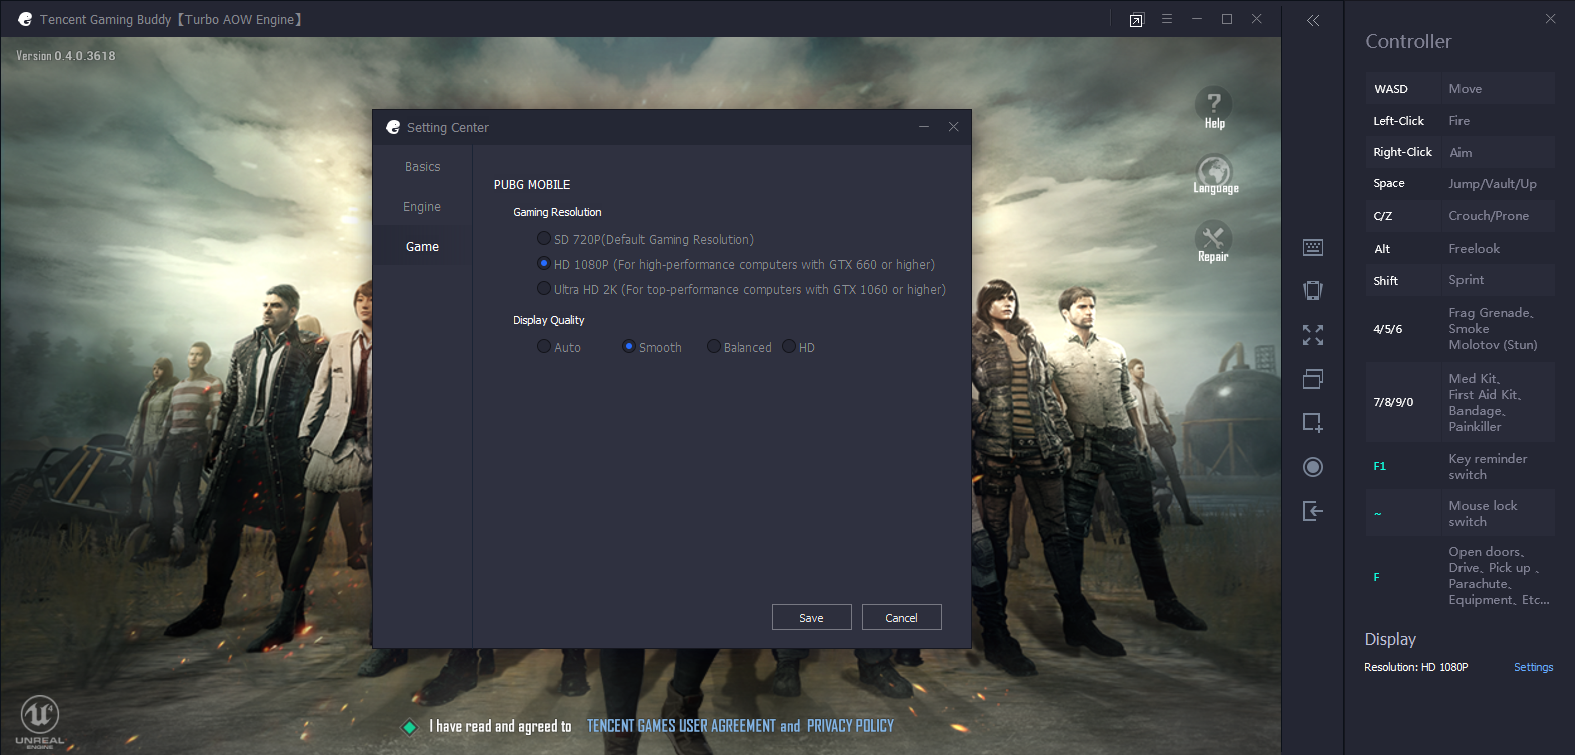 Download Tencent Gaming Buddy 1 0 5697 123 Windows - tencent gaming buddy also called tencentgameassistant is an android emulator developed by tencernt to help you comfortably play the international ! pubg